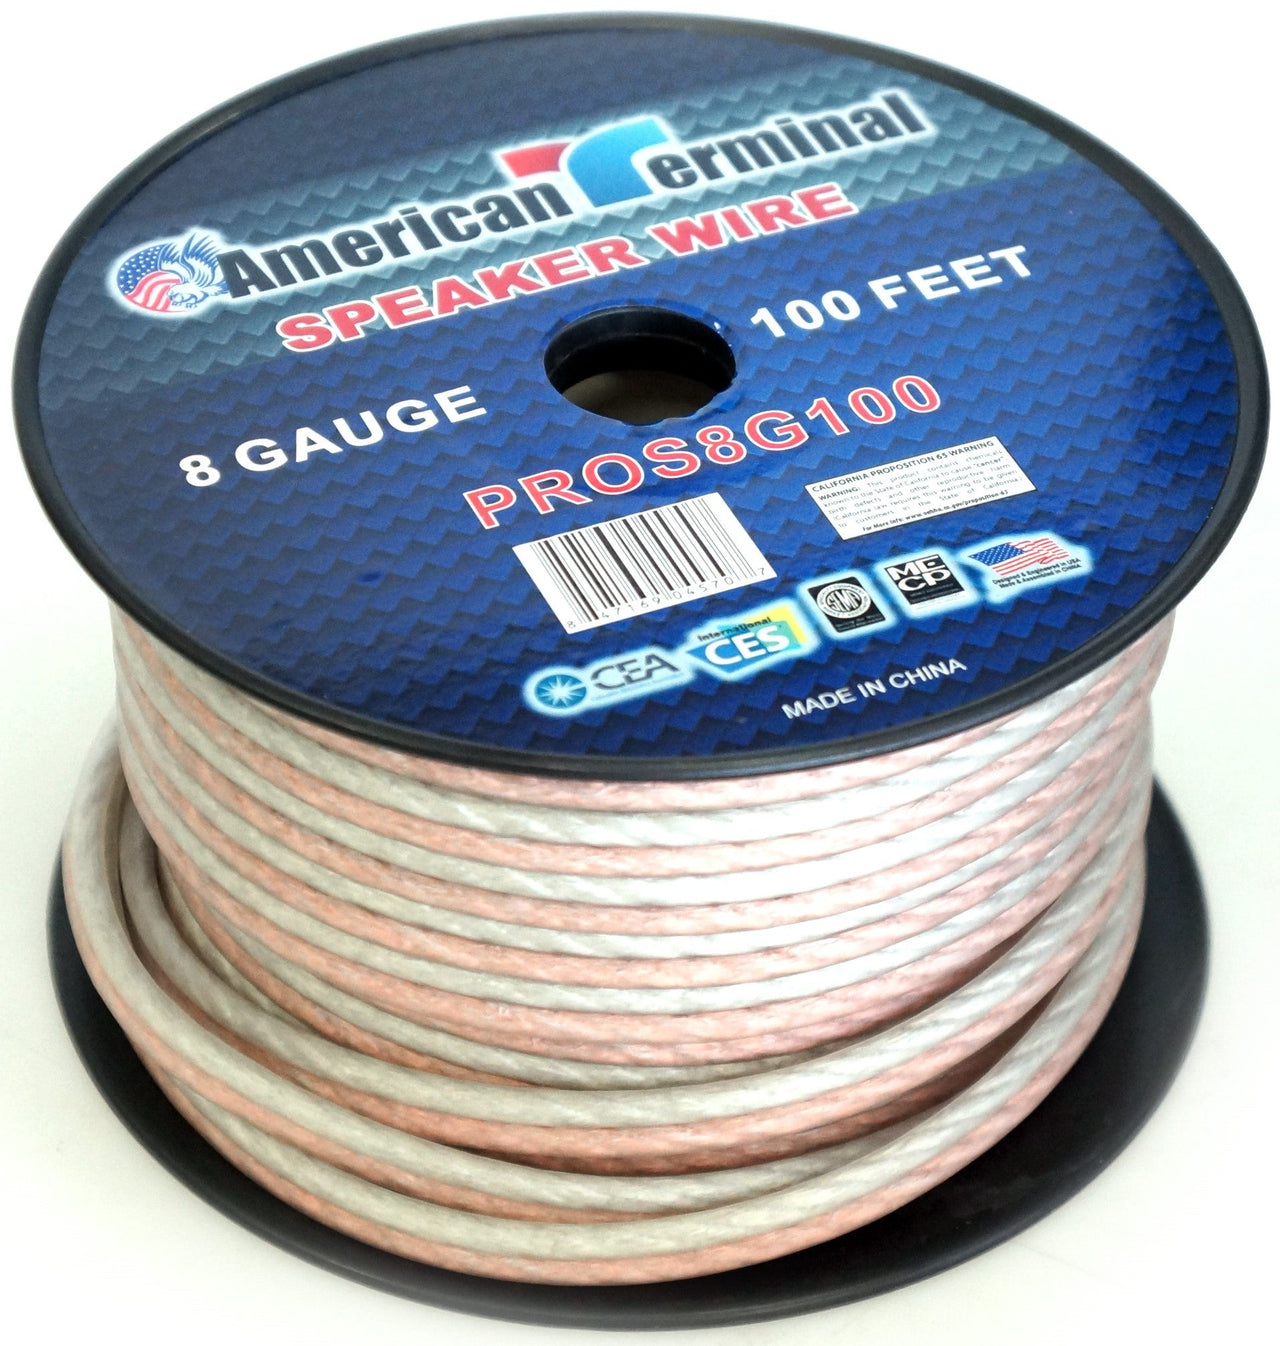 2 American Terminal PROS8G100 100' 8 Gauge PRO PA DJ Car Home Marine Audio Speaker Wire Cable Spool